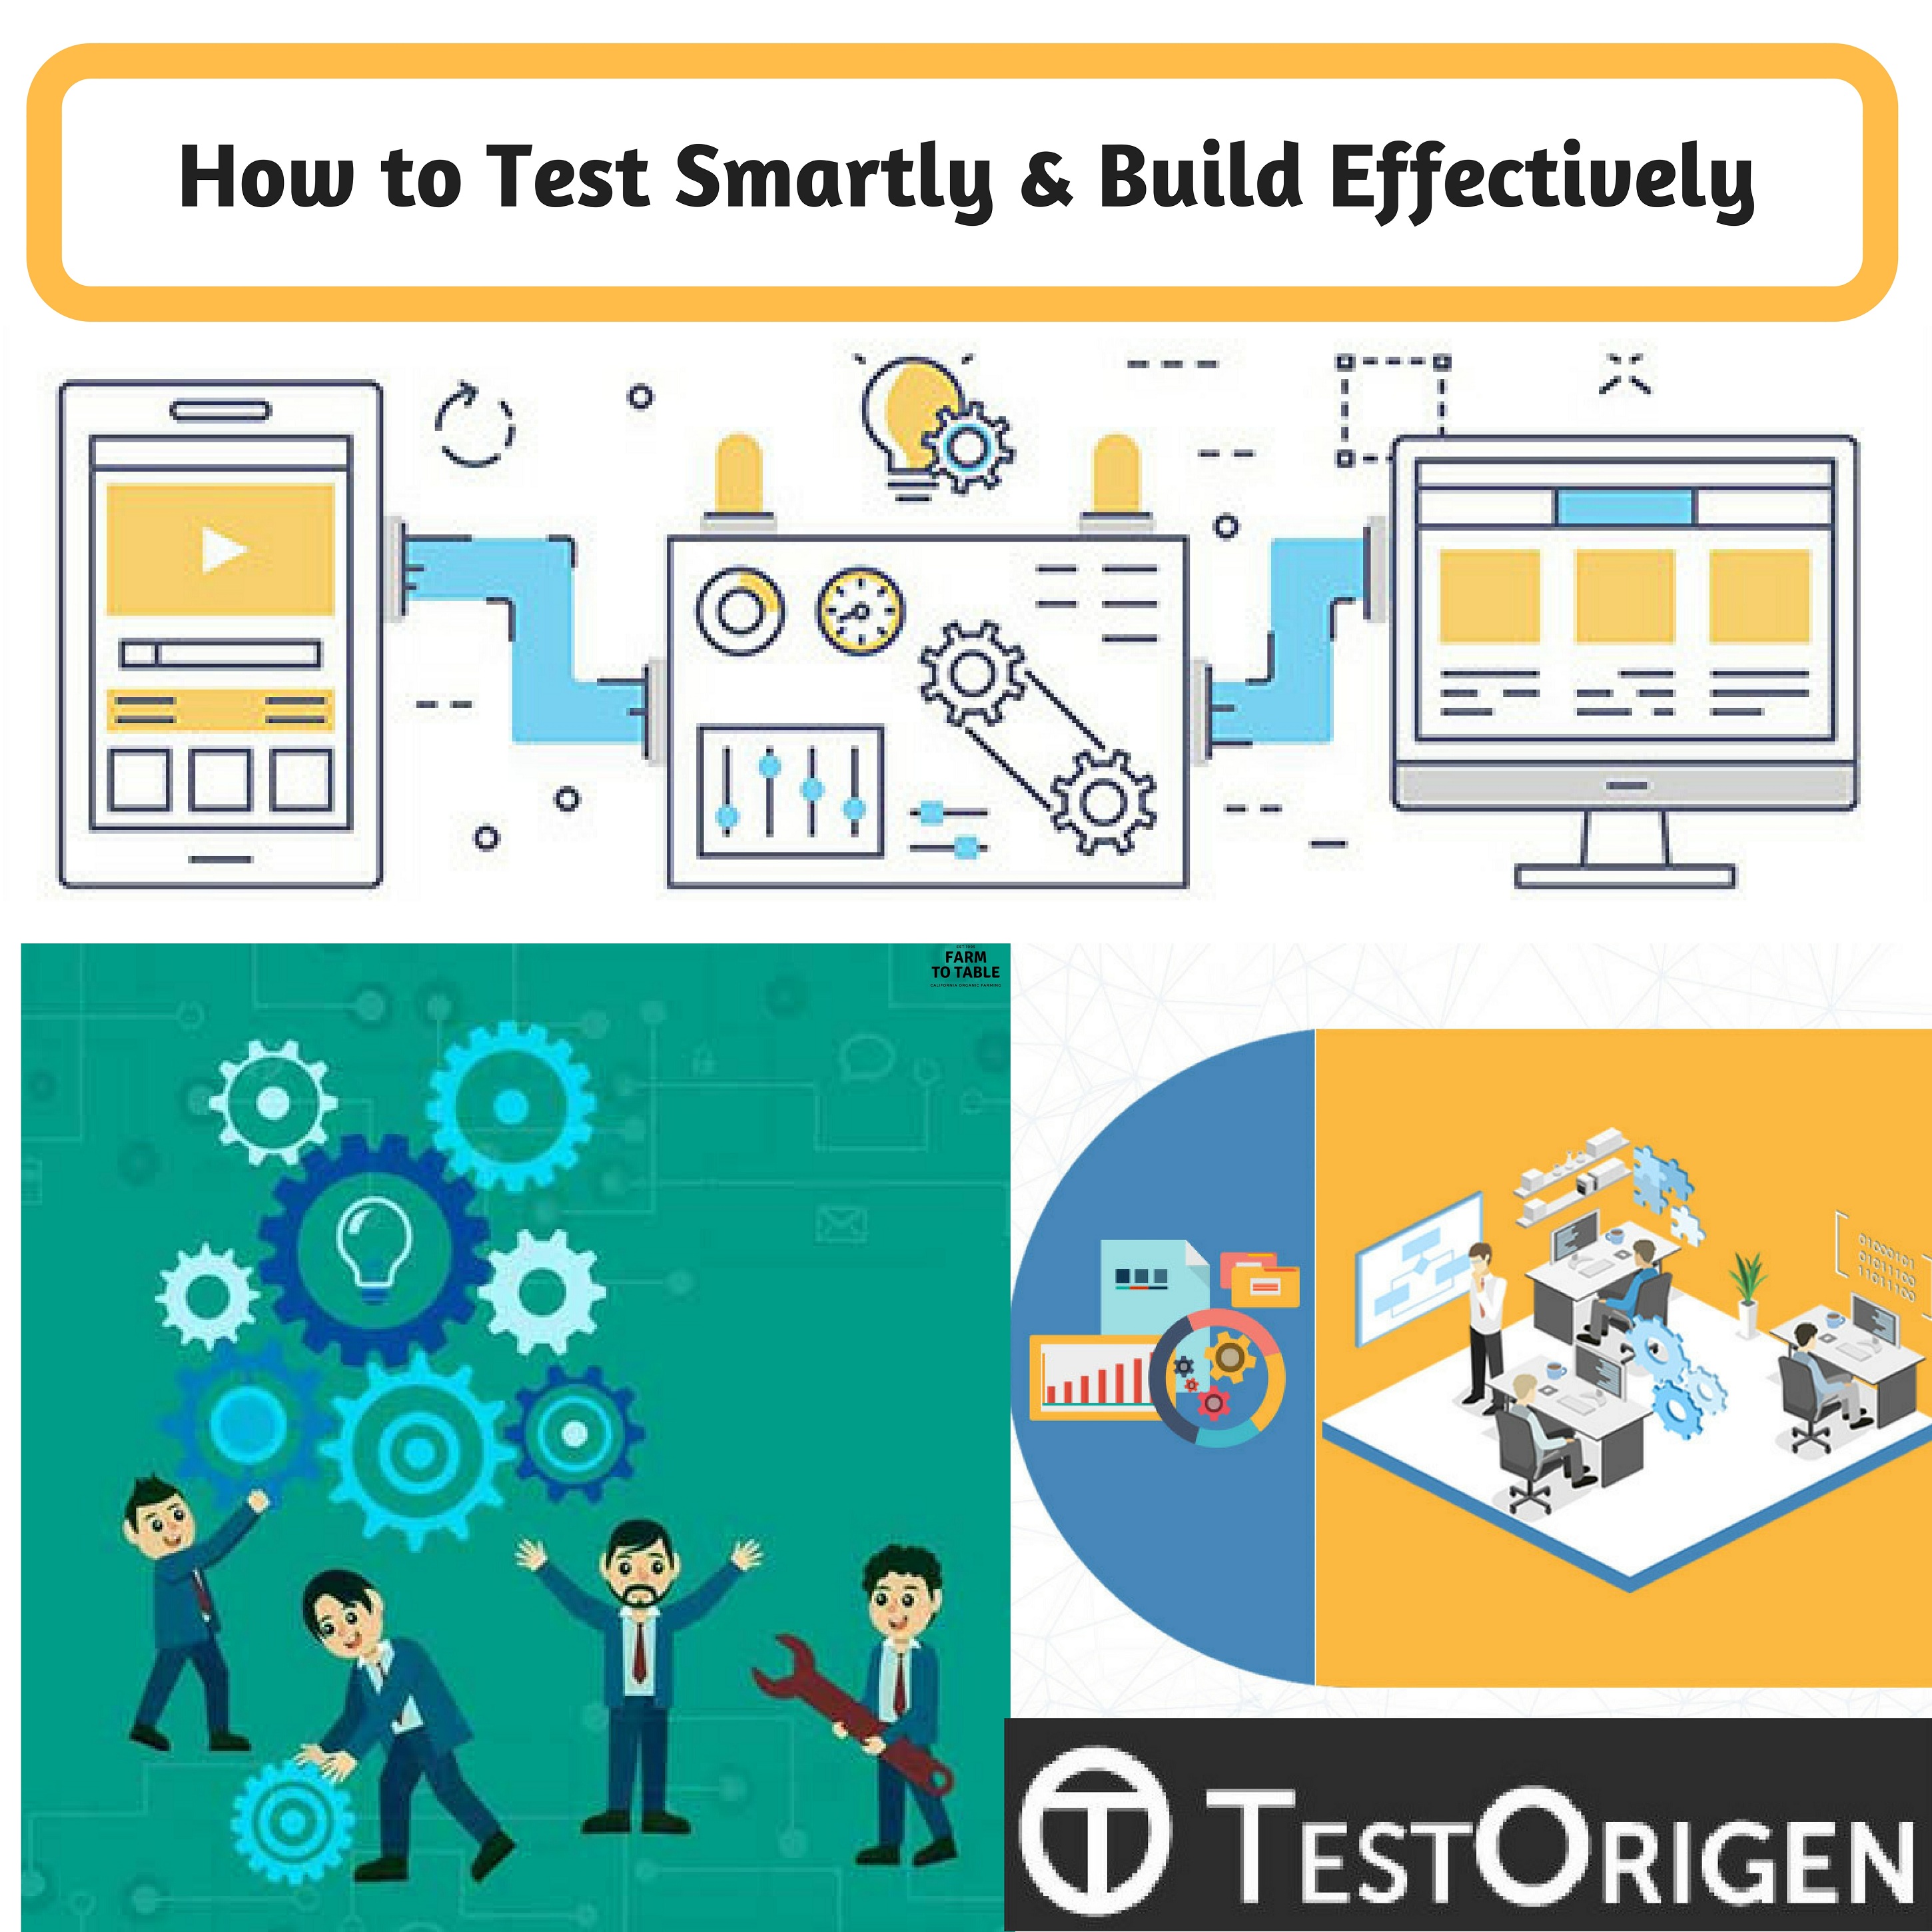 How to Test Smartly & Build Effectively